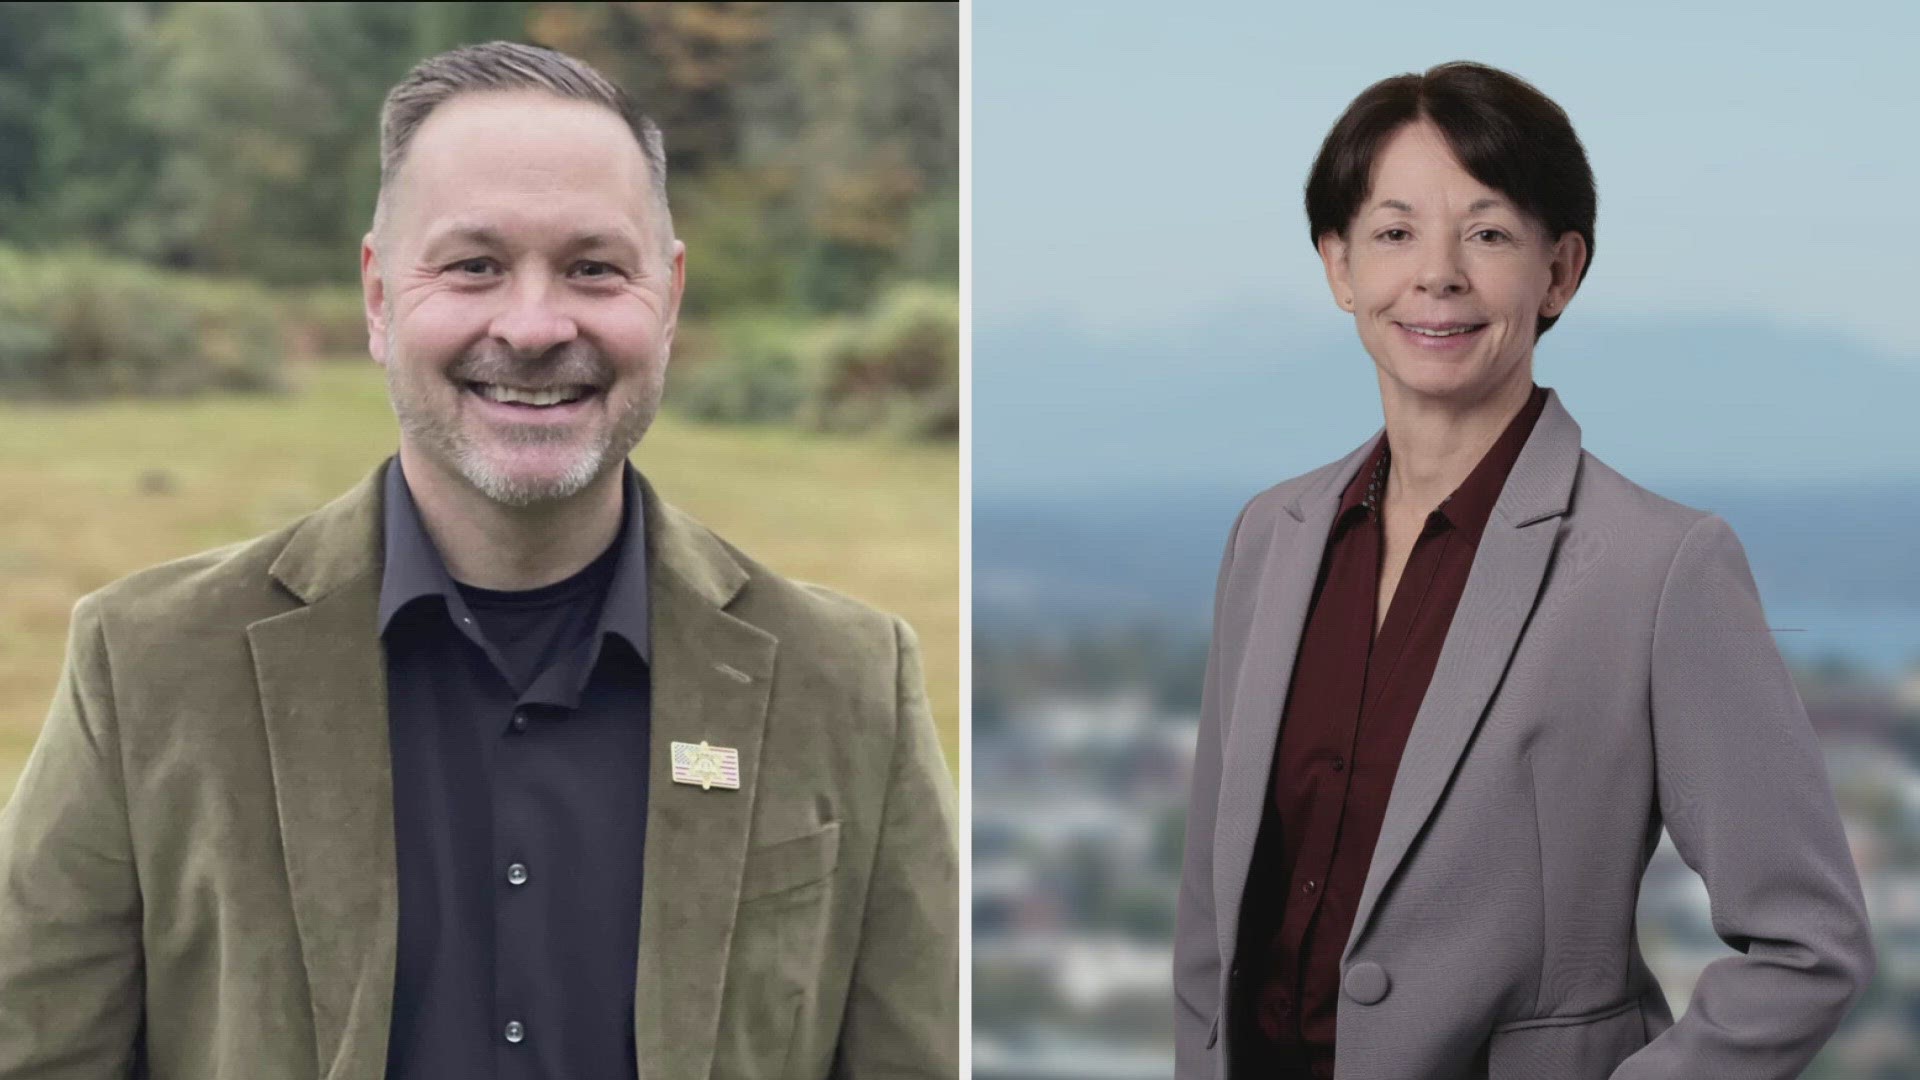 The race for Snohomish County sheriff between incumbent Adam Fortney and challenger Susanna Johnson is heating up